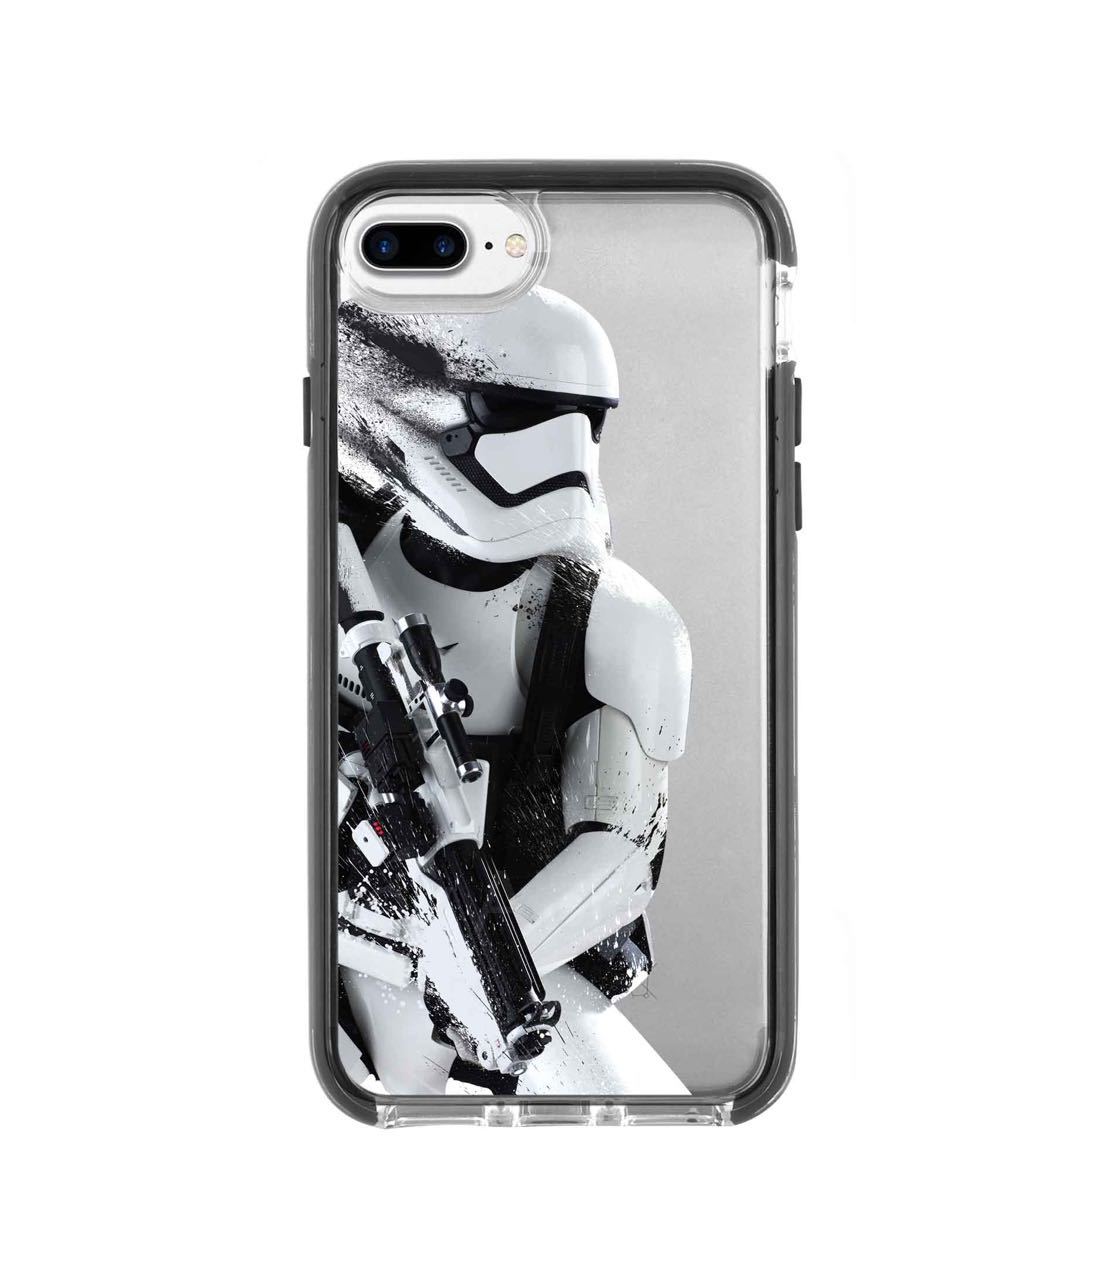 Trooper Storm - Extreme Phone Case for iPhone 7 Plus